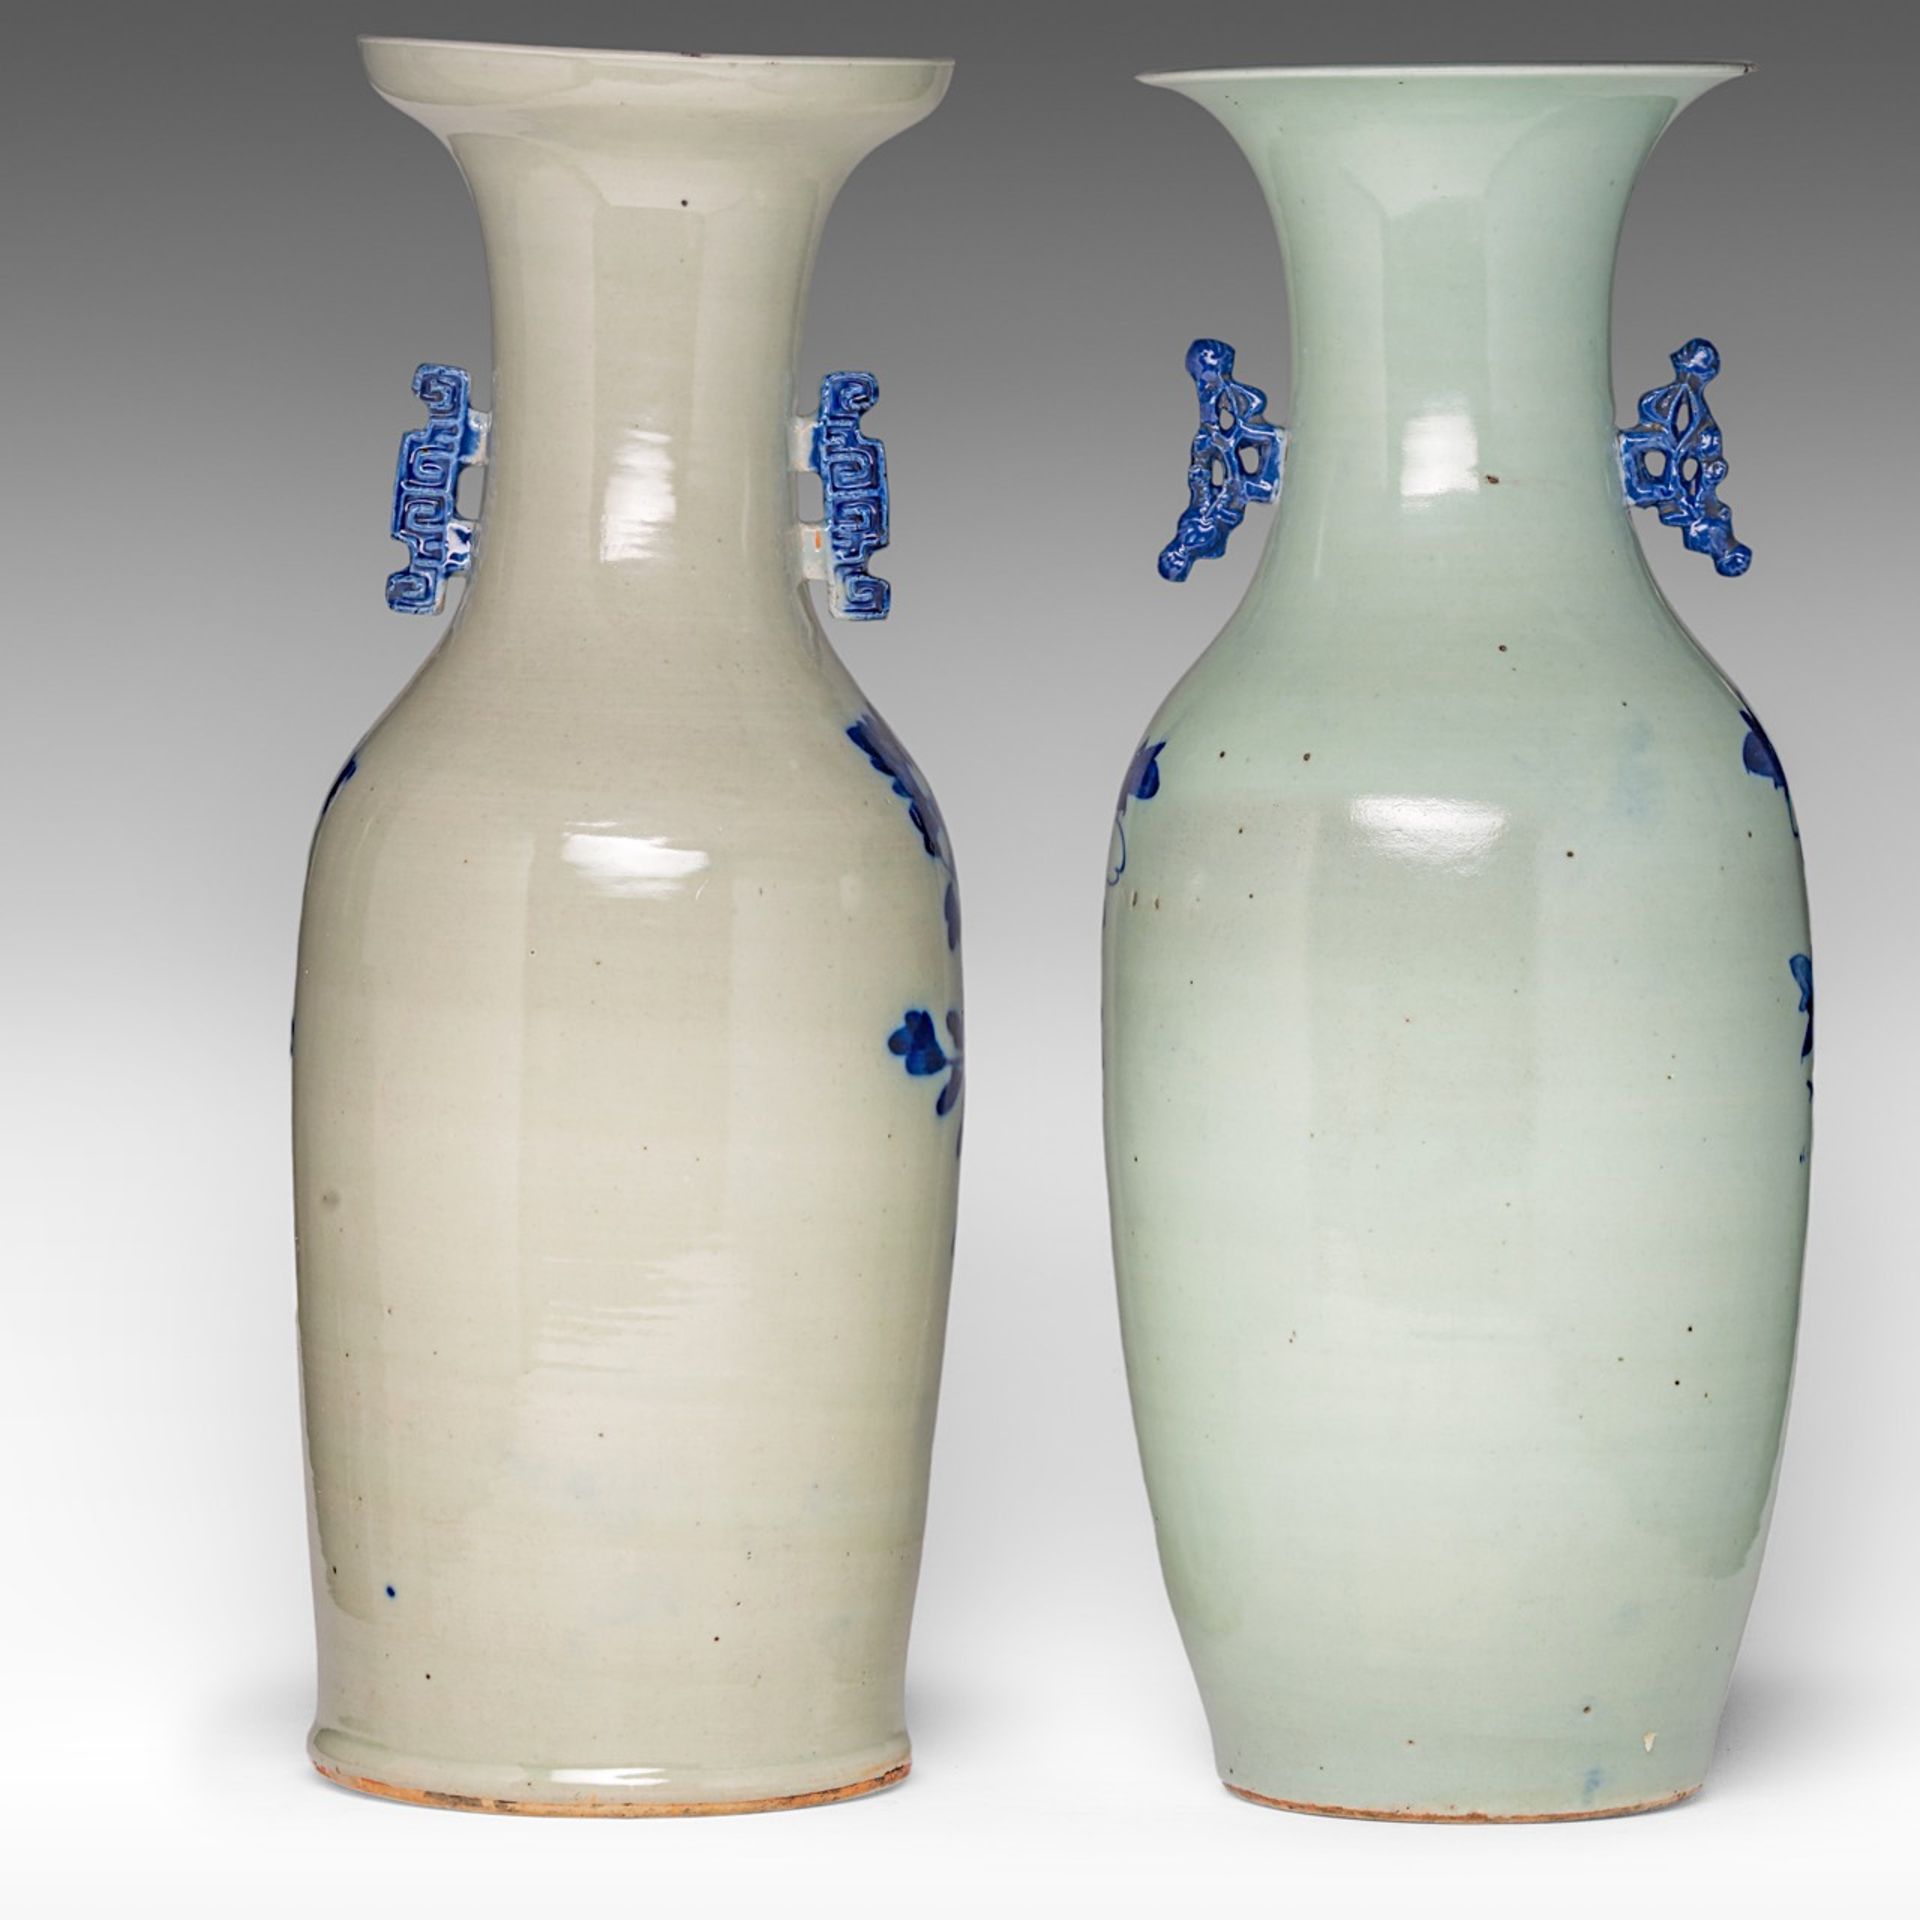 Four Chinese blue and white on celadon ground 'Flowers and birds' vases, late 19thC, H 57 - 58 cm - Image 8 of 13